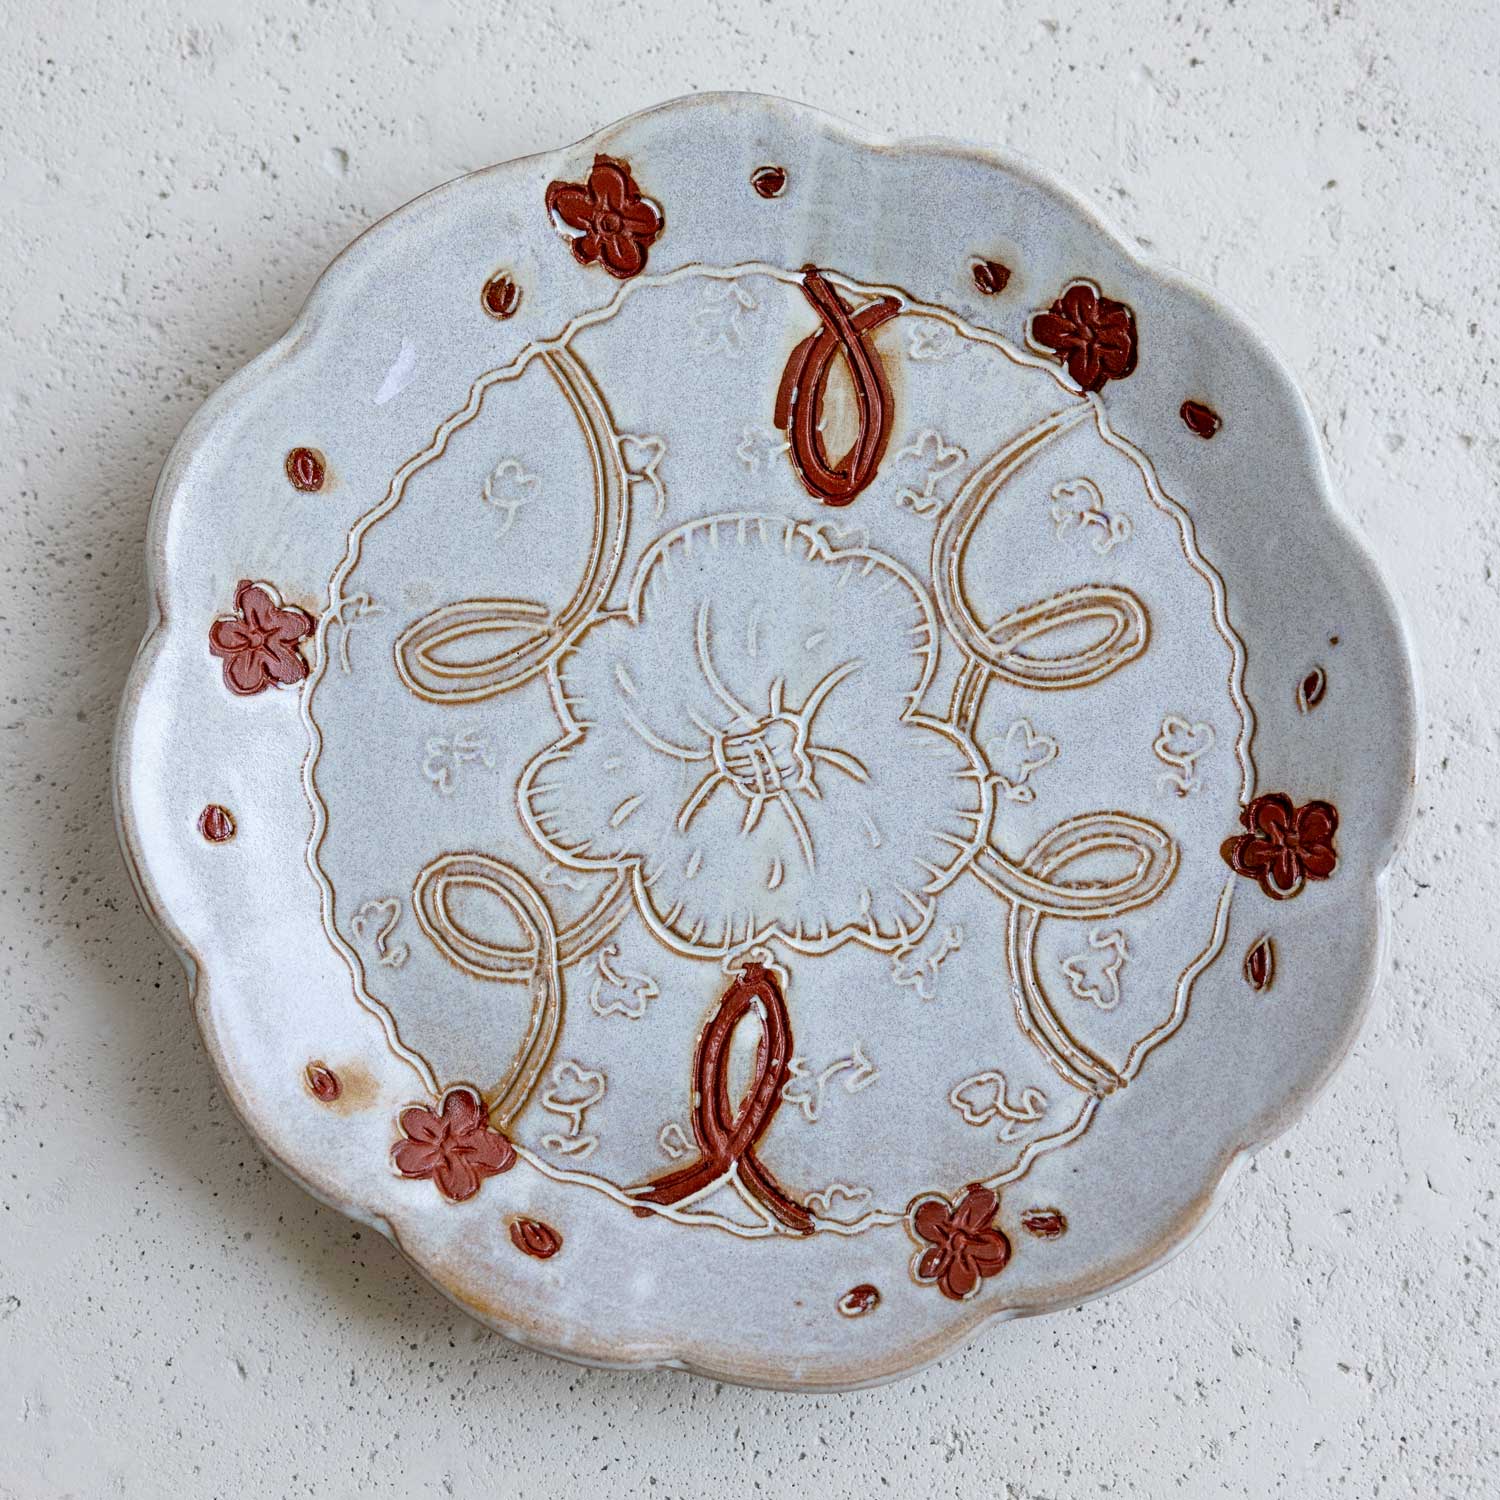 Zoe Pinnell: Small White Plate With Floral Centre Product Image 1 of 4